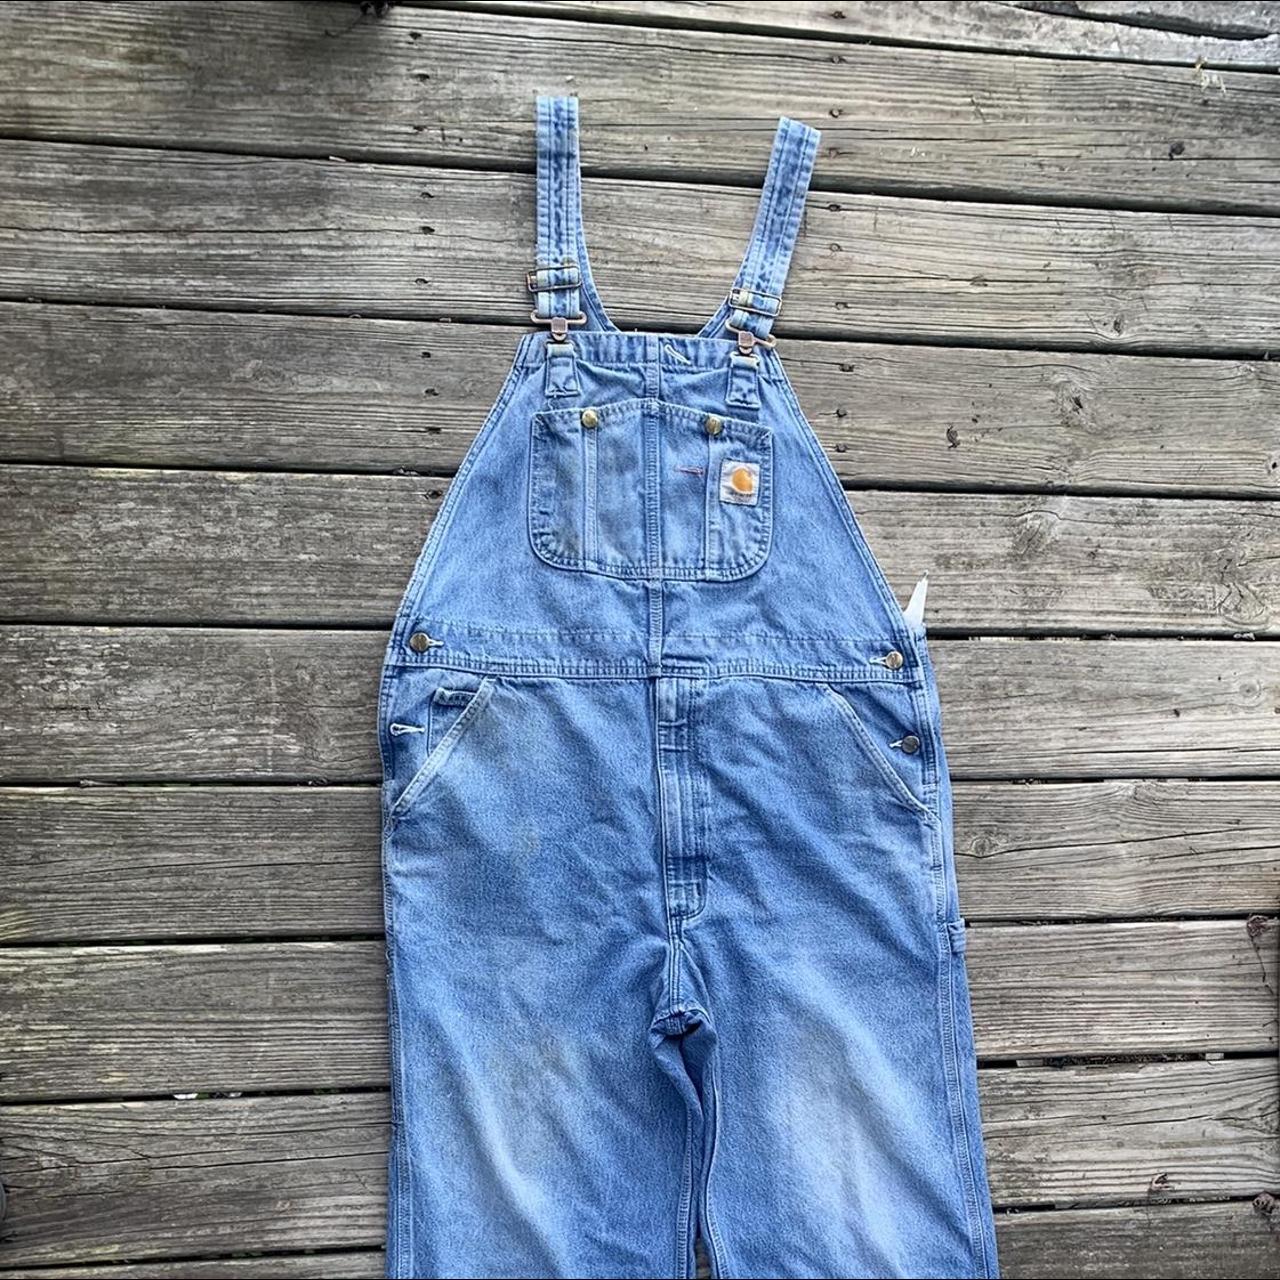 Carhartt Overalls -Condition 7.5/10 -Flaws shown in... - Depop